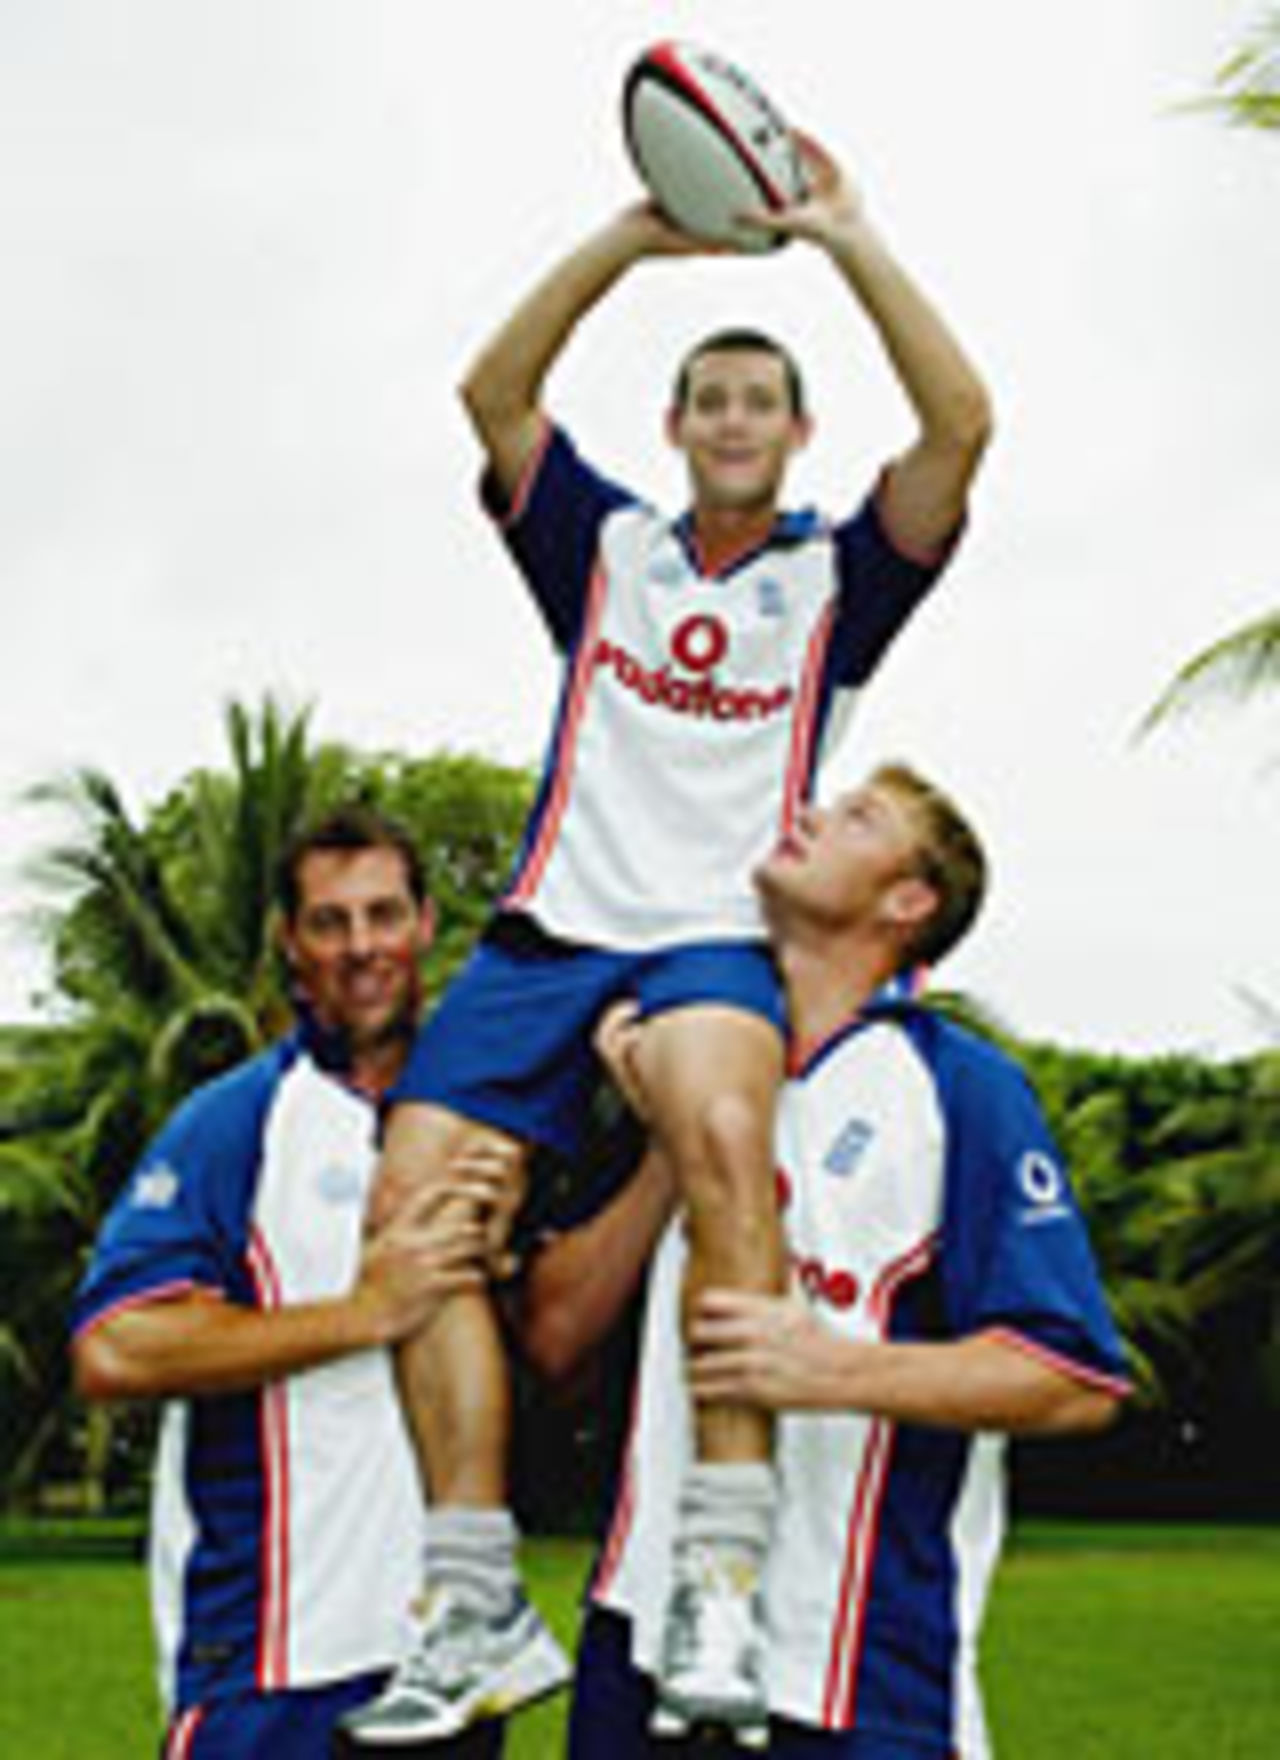 Marcus Trescothick and Andrew Flintoff lift up Chris Read lineout style as England get into the mood ahead of Sunday's rugby World Cup semi-final, November 14, 2003